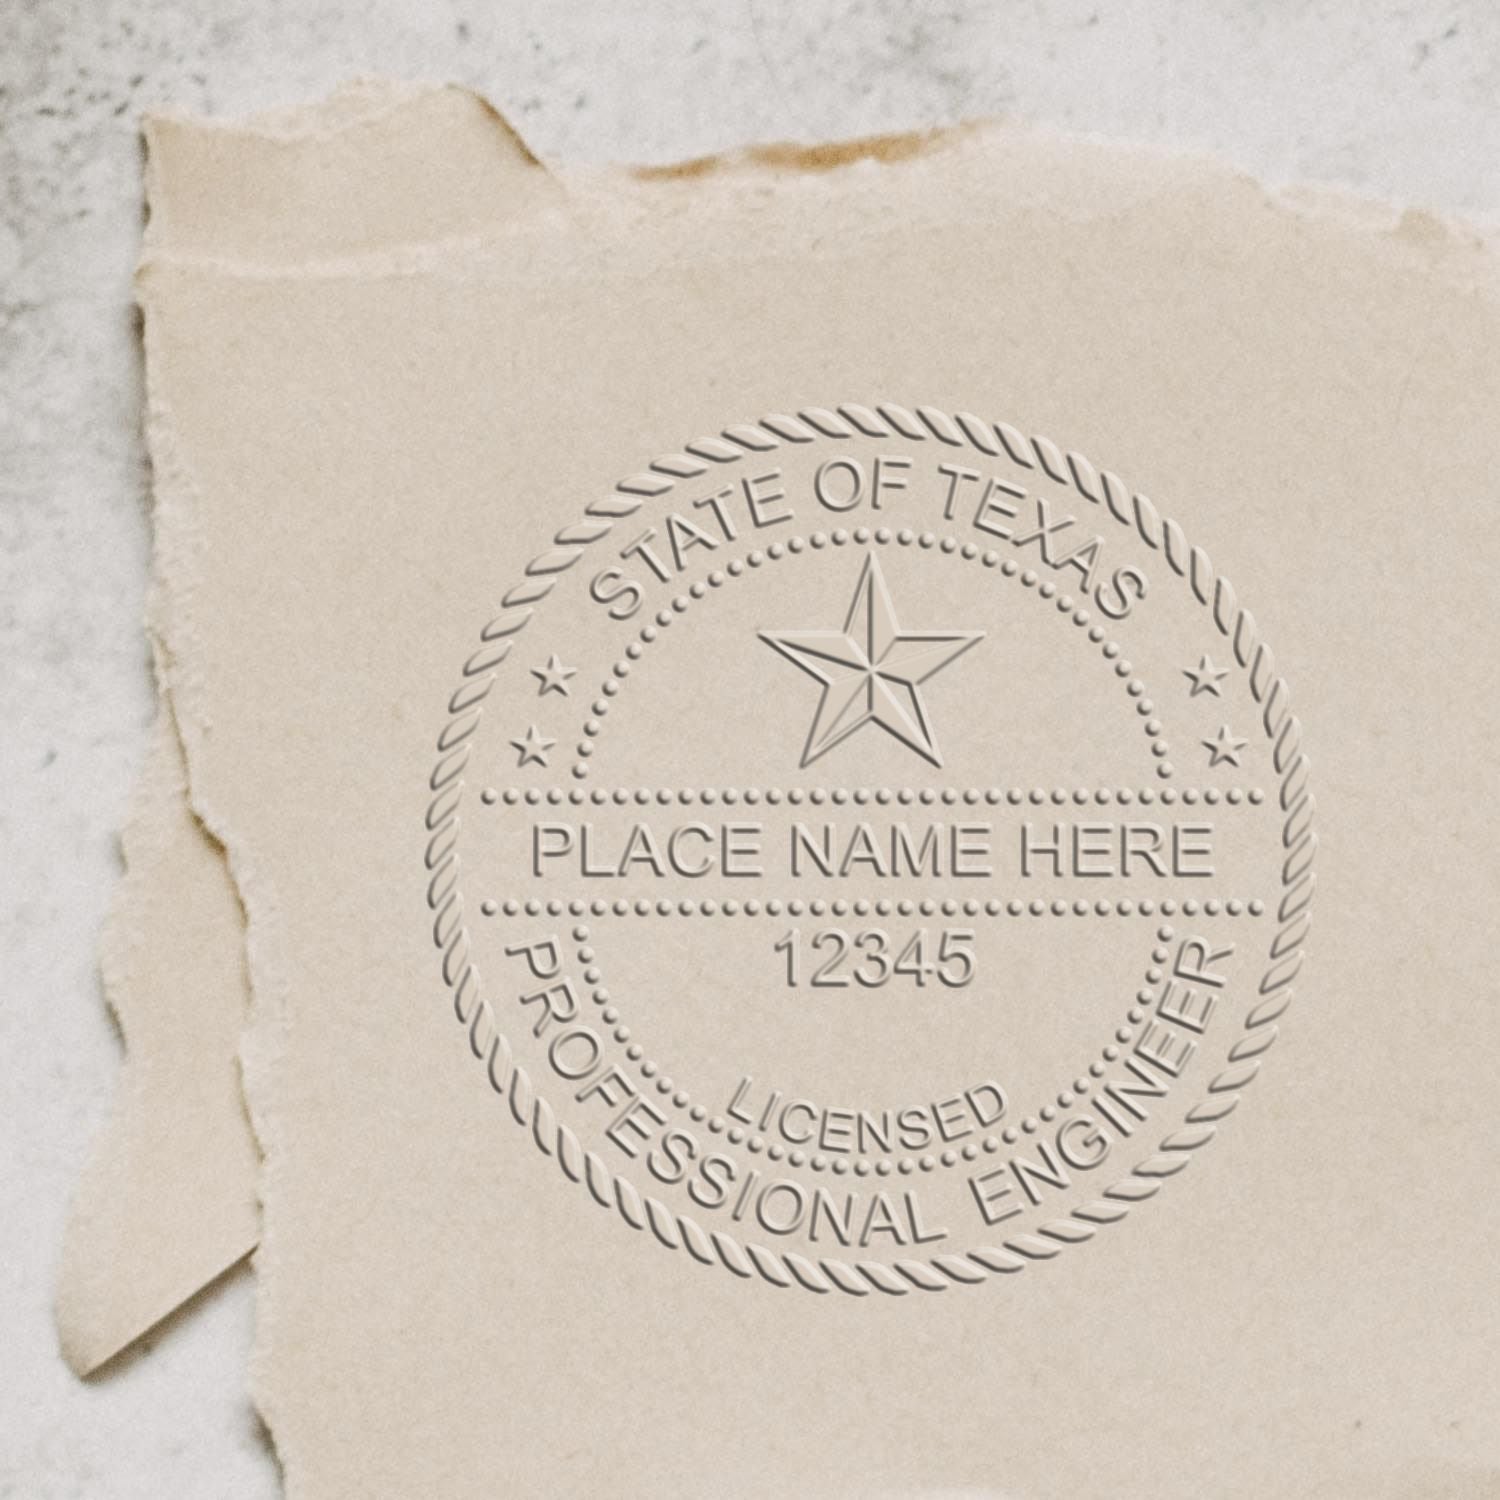 A stamped impression of the Texas Engineer Desk Seal in this stylish lifestyle photo, setting the tone for a unique and personalized product.